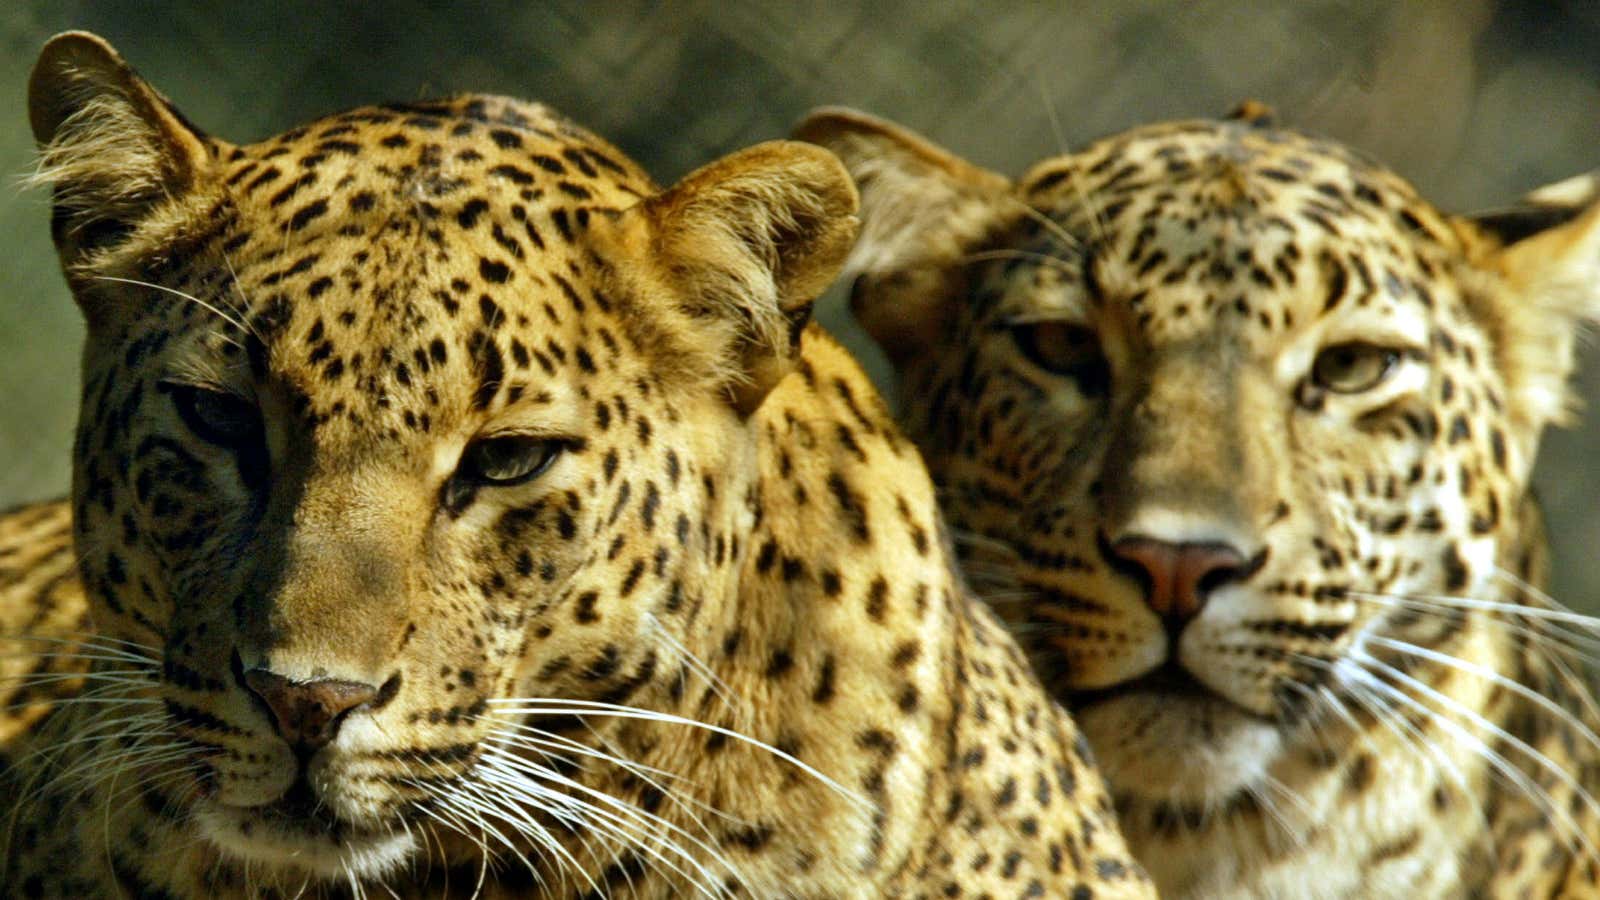 Leopards sit in their enclosure in New Delhi zoo December 15, 2005. Leopards are found throughout the Indian sub-continent with the exception of the desert and densely-settled areas. It can exist in areas without a plentiful water supply.